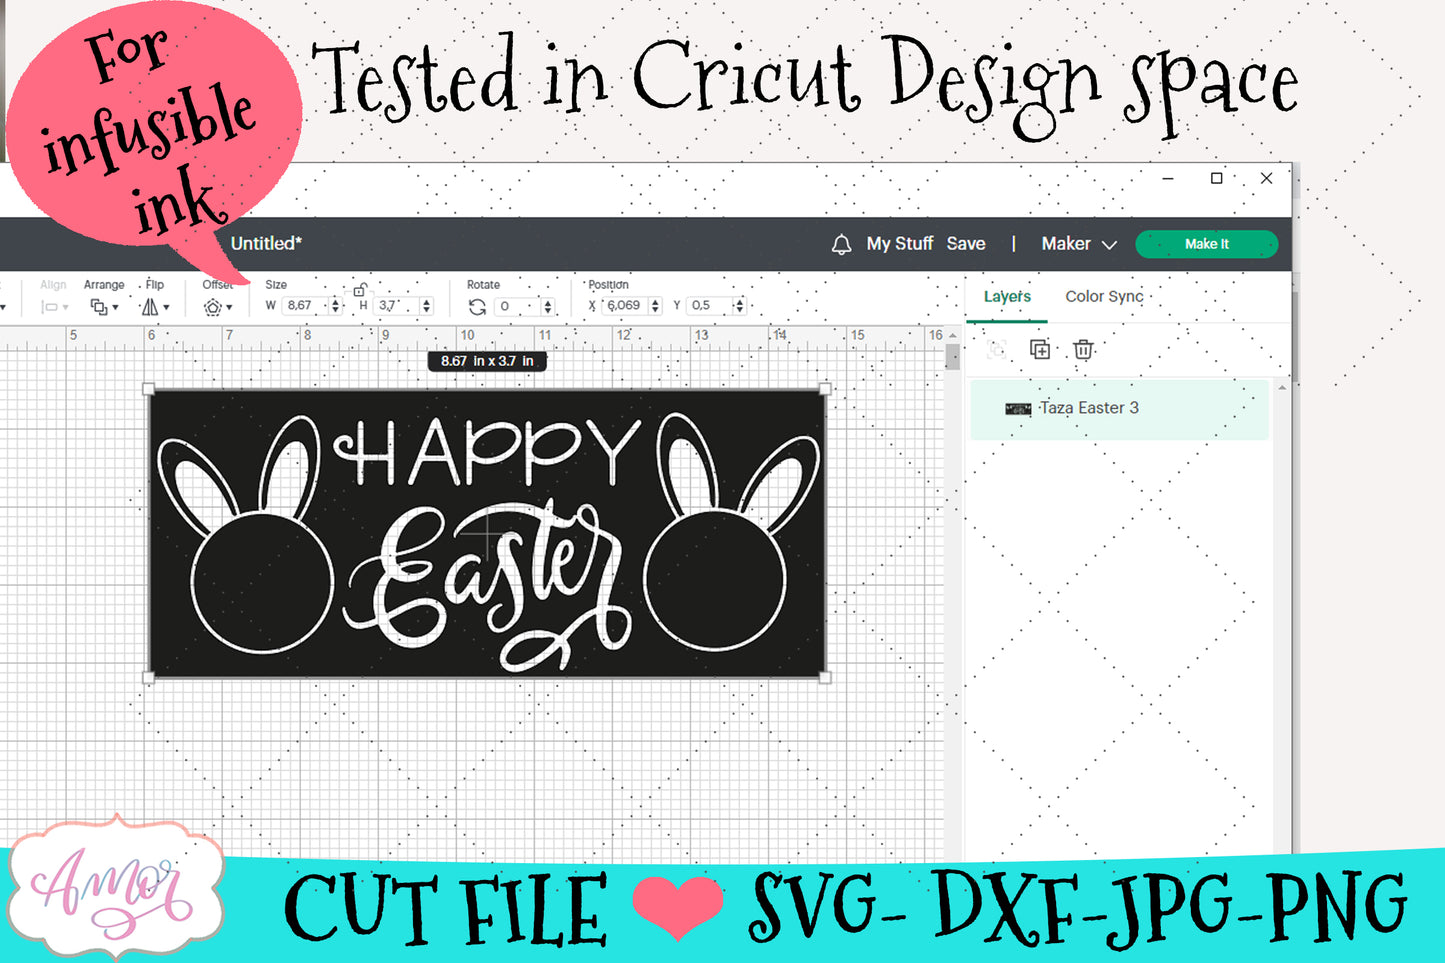 Customizable Easter Mug Wrap SVG for Cricut infusible ink